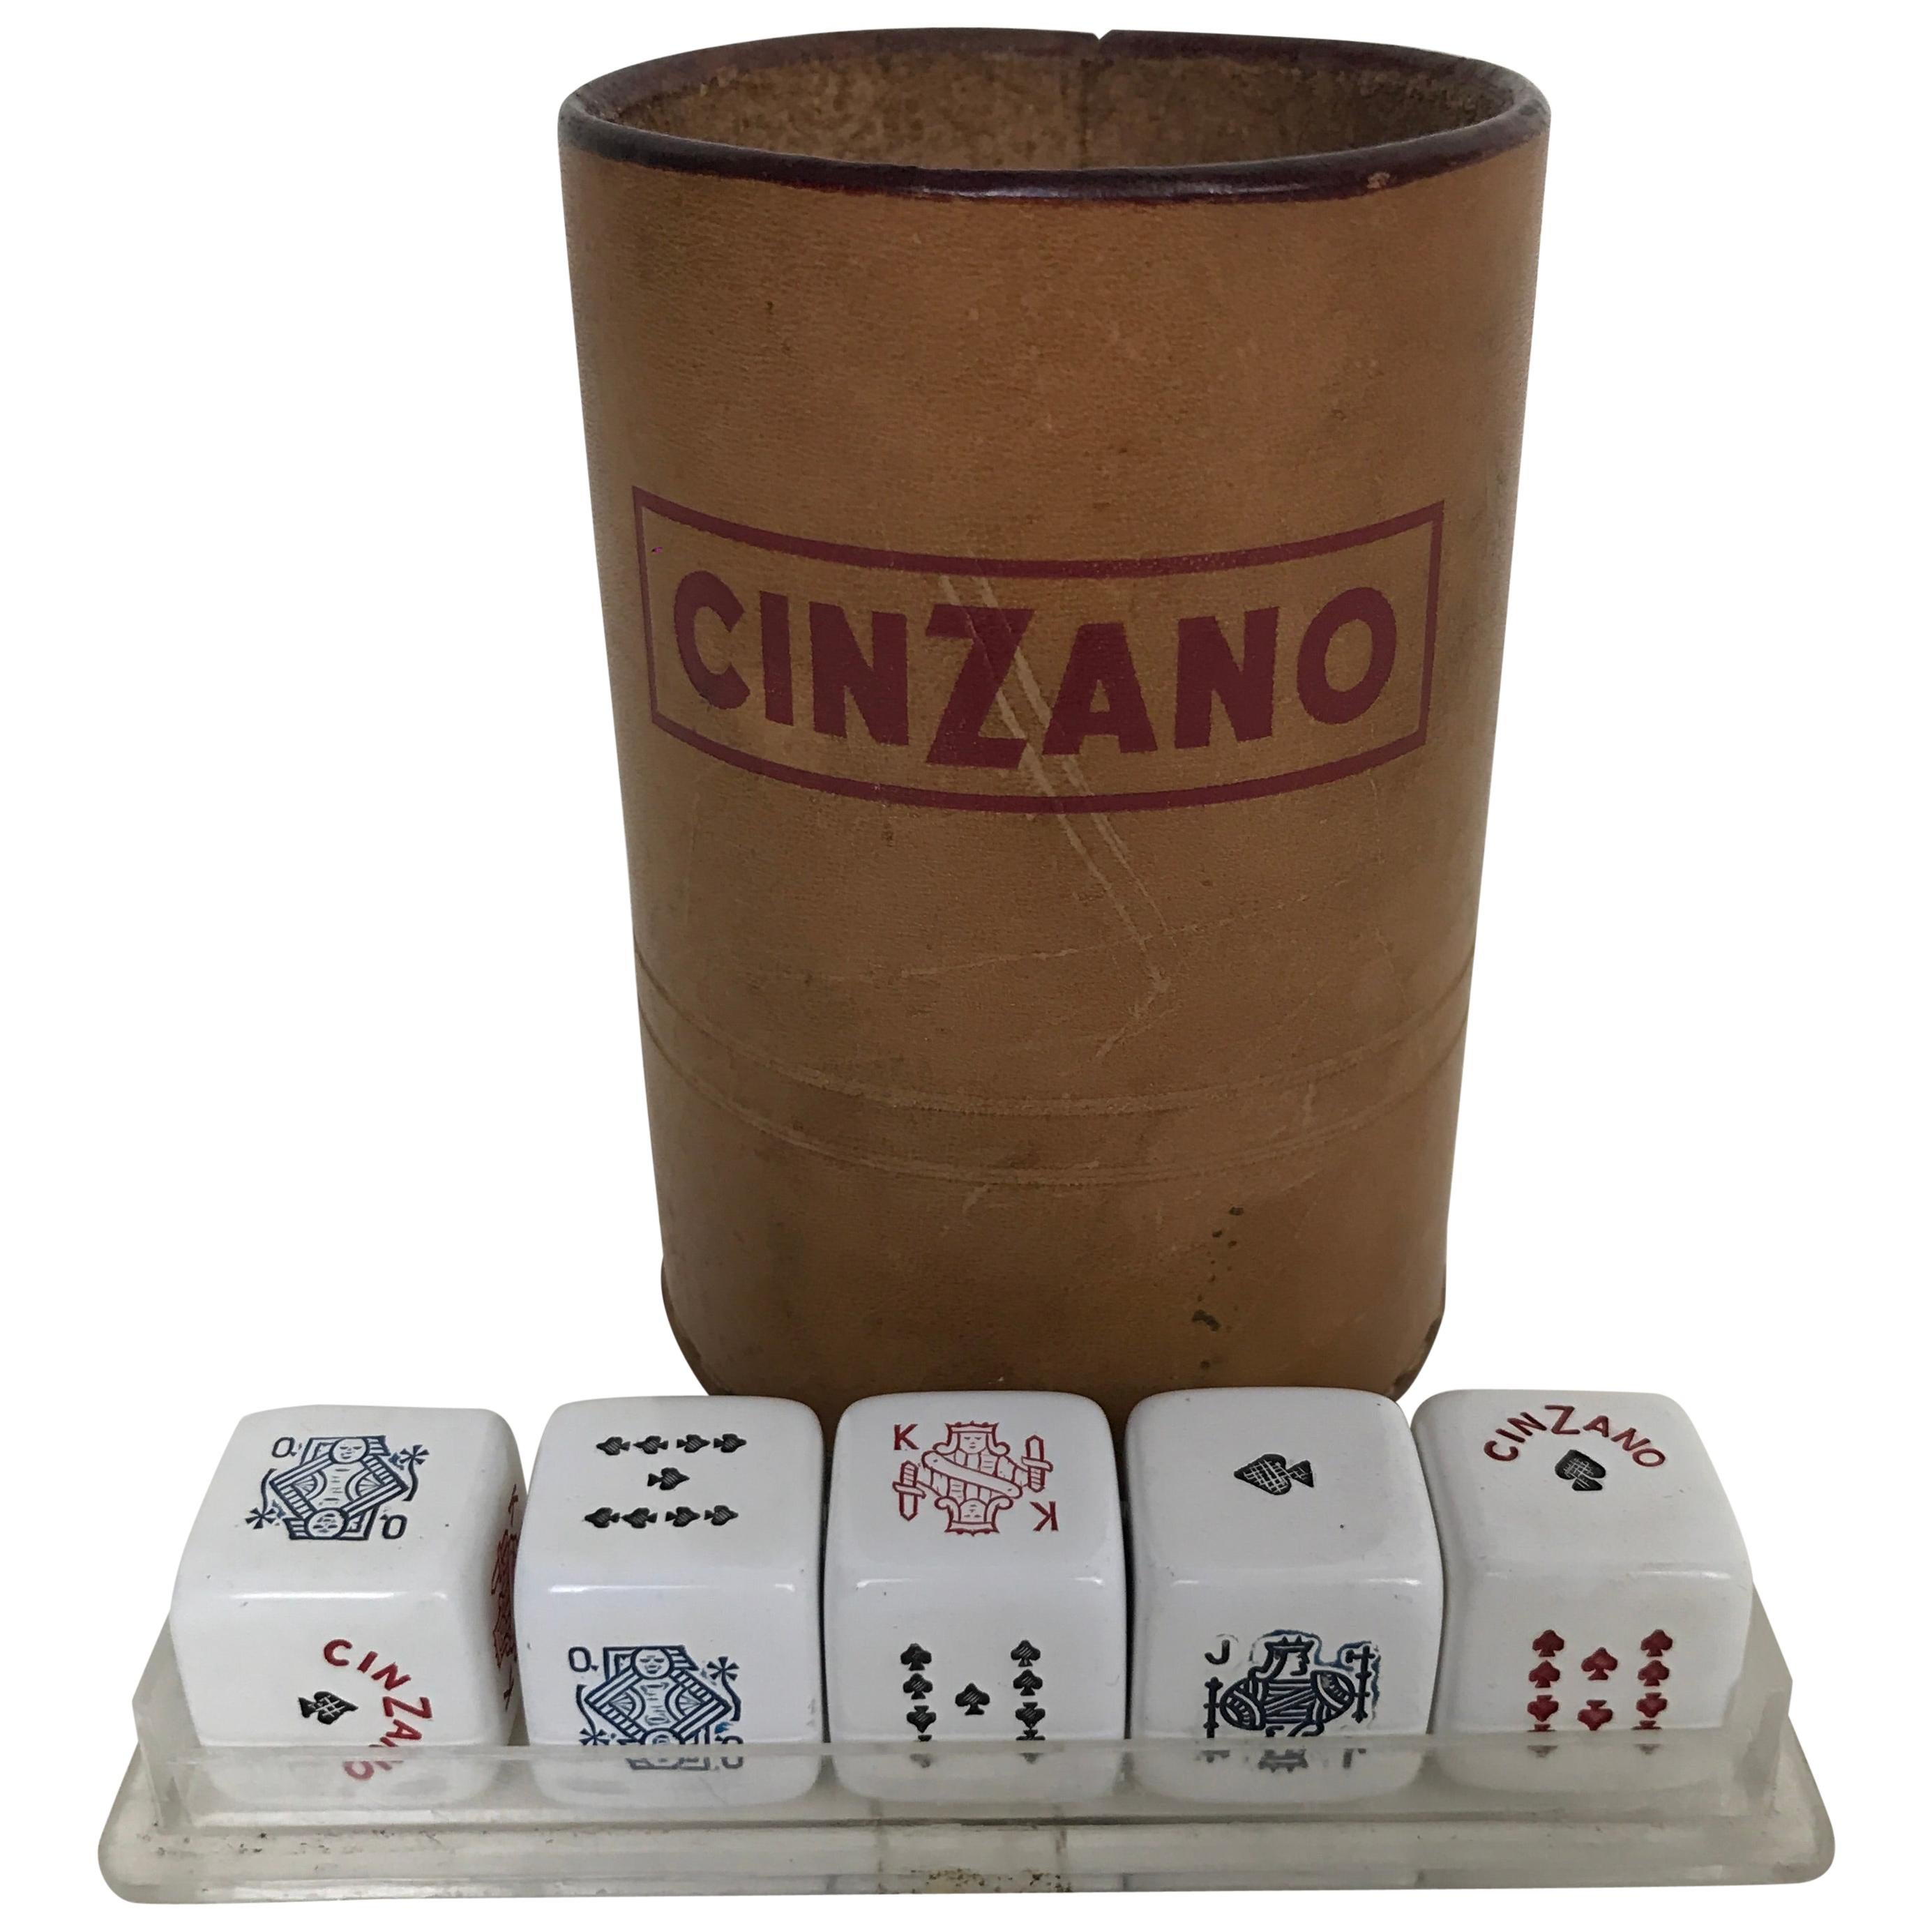 1970s Vintage Italian Cinzano Advertising Leather Dice Cup with Set of Dice For Sale